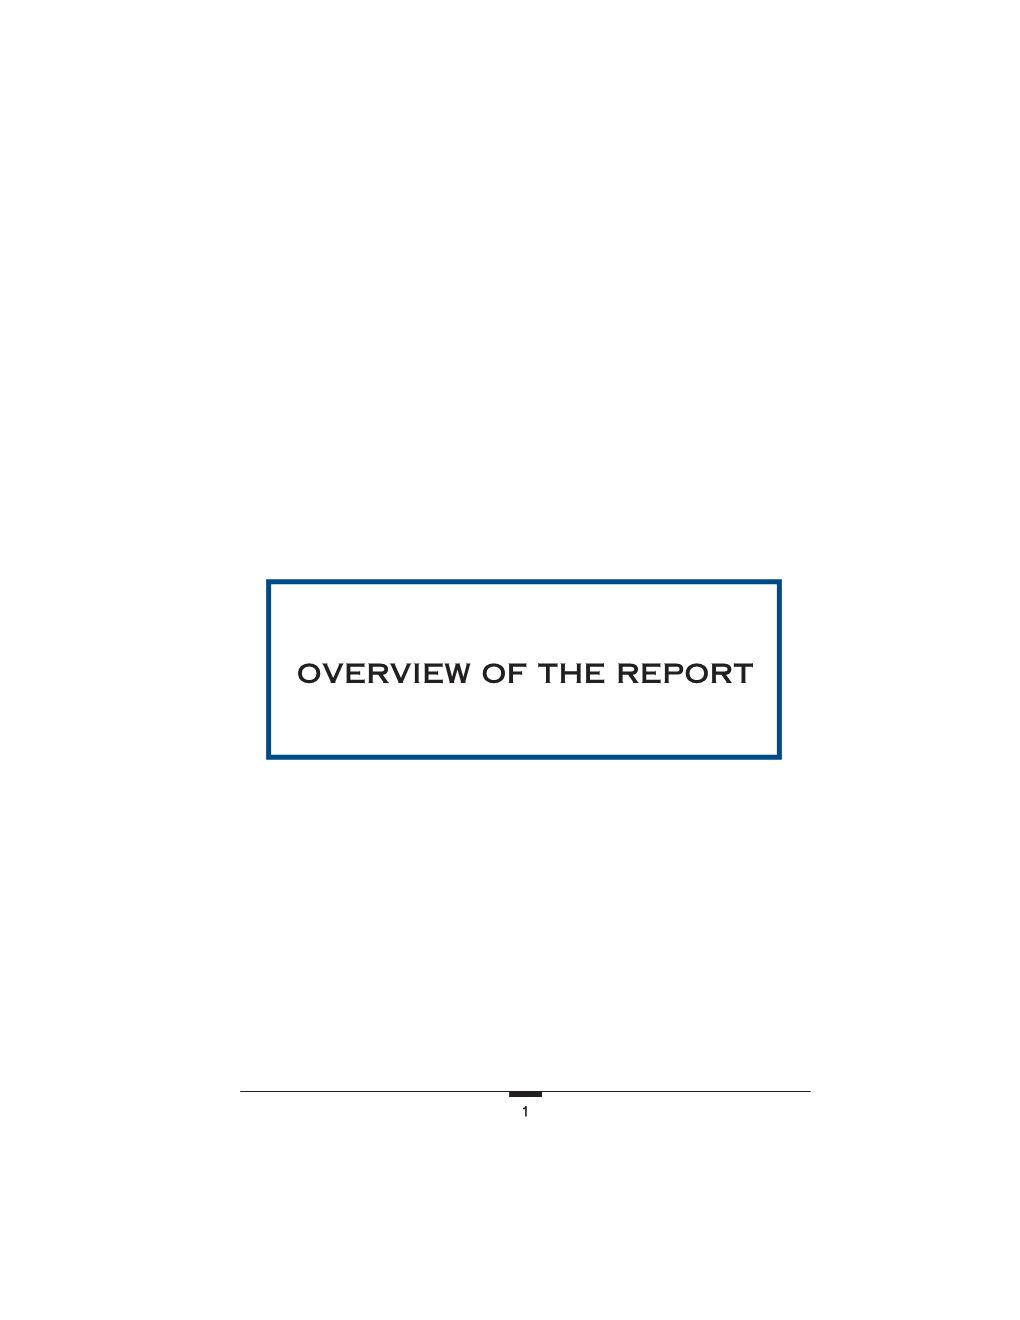 Overview of the Report